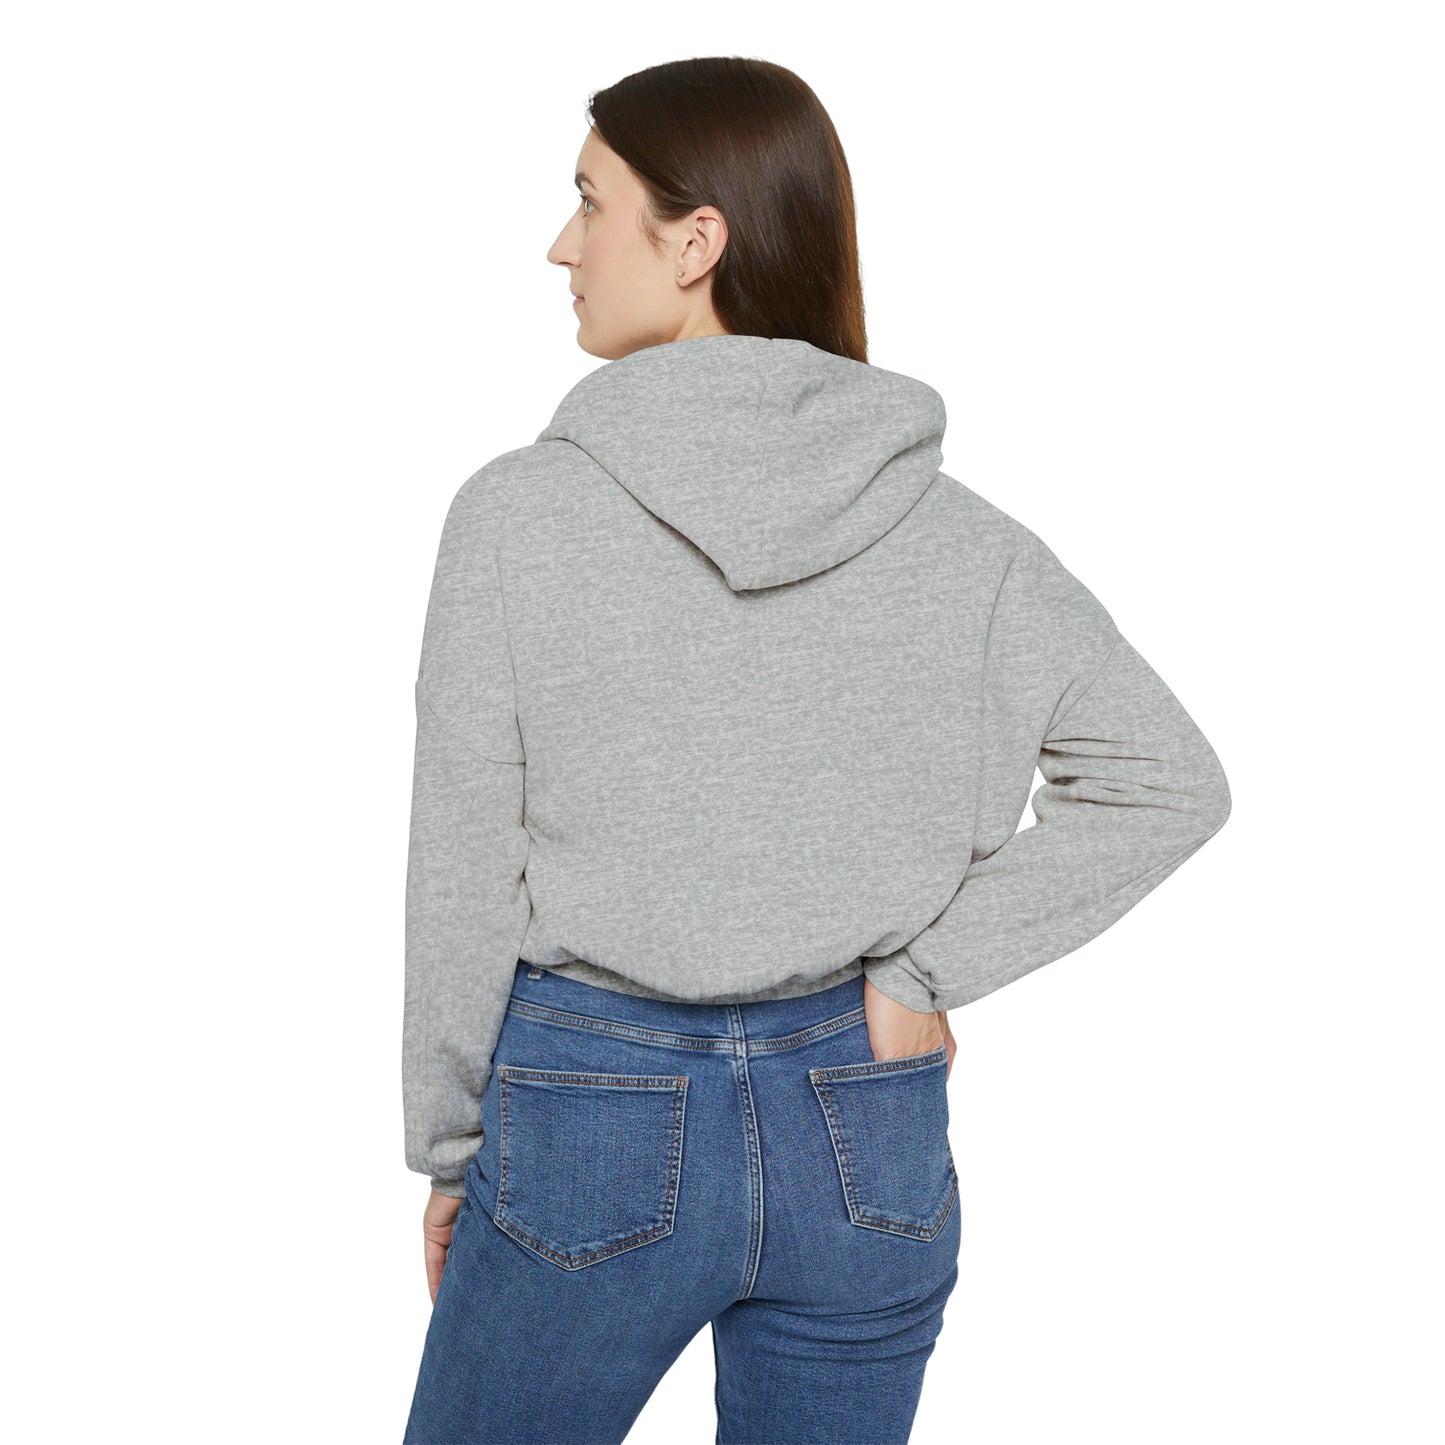 Holiday High Christmas, Women's Cinched Bottom Hoodie